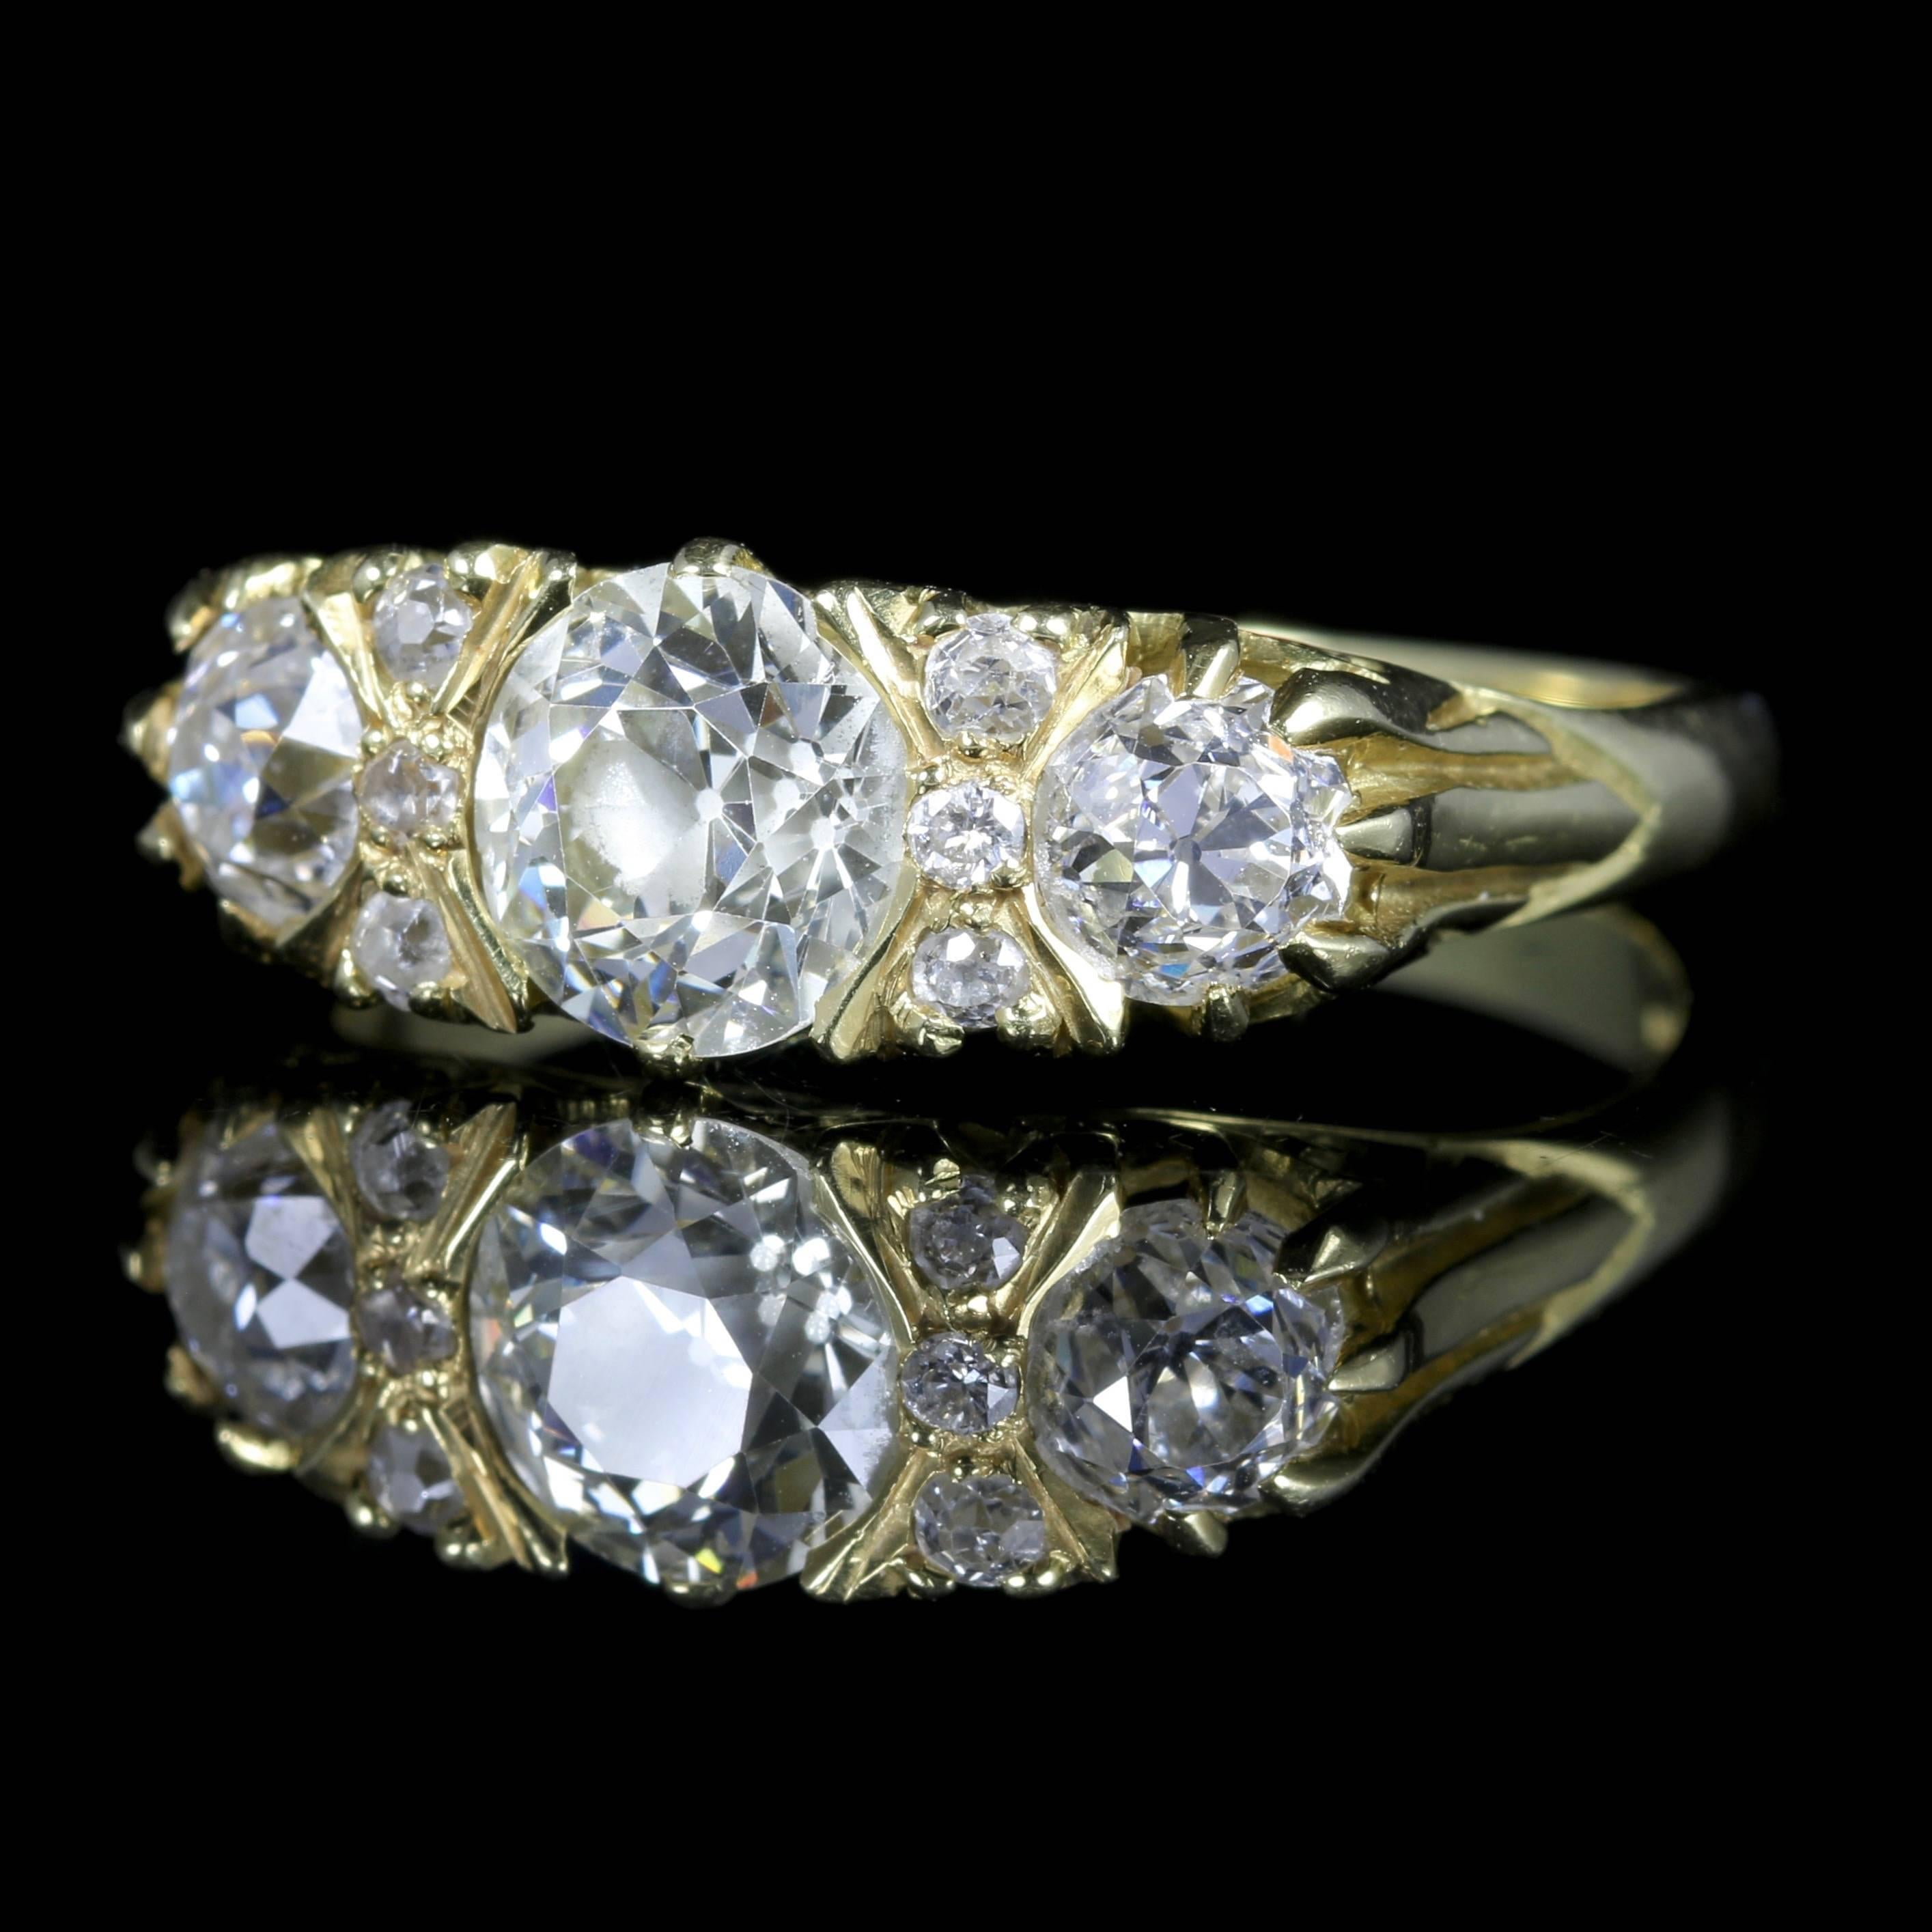 For more details please click continue reading down below...

This fabulous 18ct Yellow Gold antique Victorian Diamond ring is Circa 1880.

This spectacular carved ring boasts three large old cut bright white Diamonds which are VS1 H colour, and